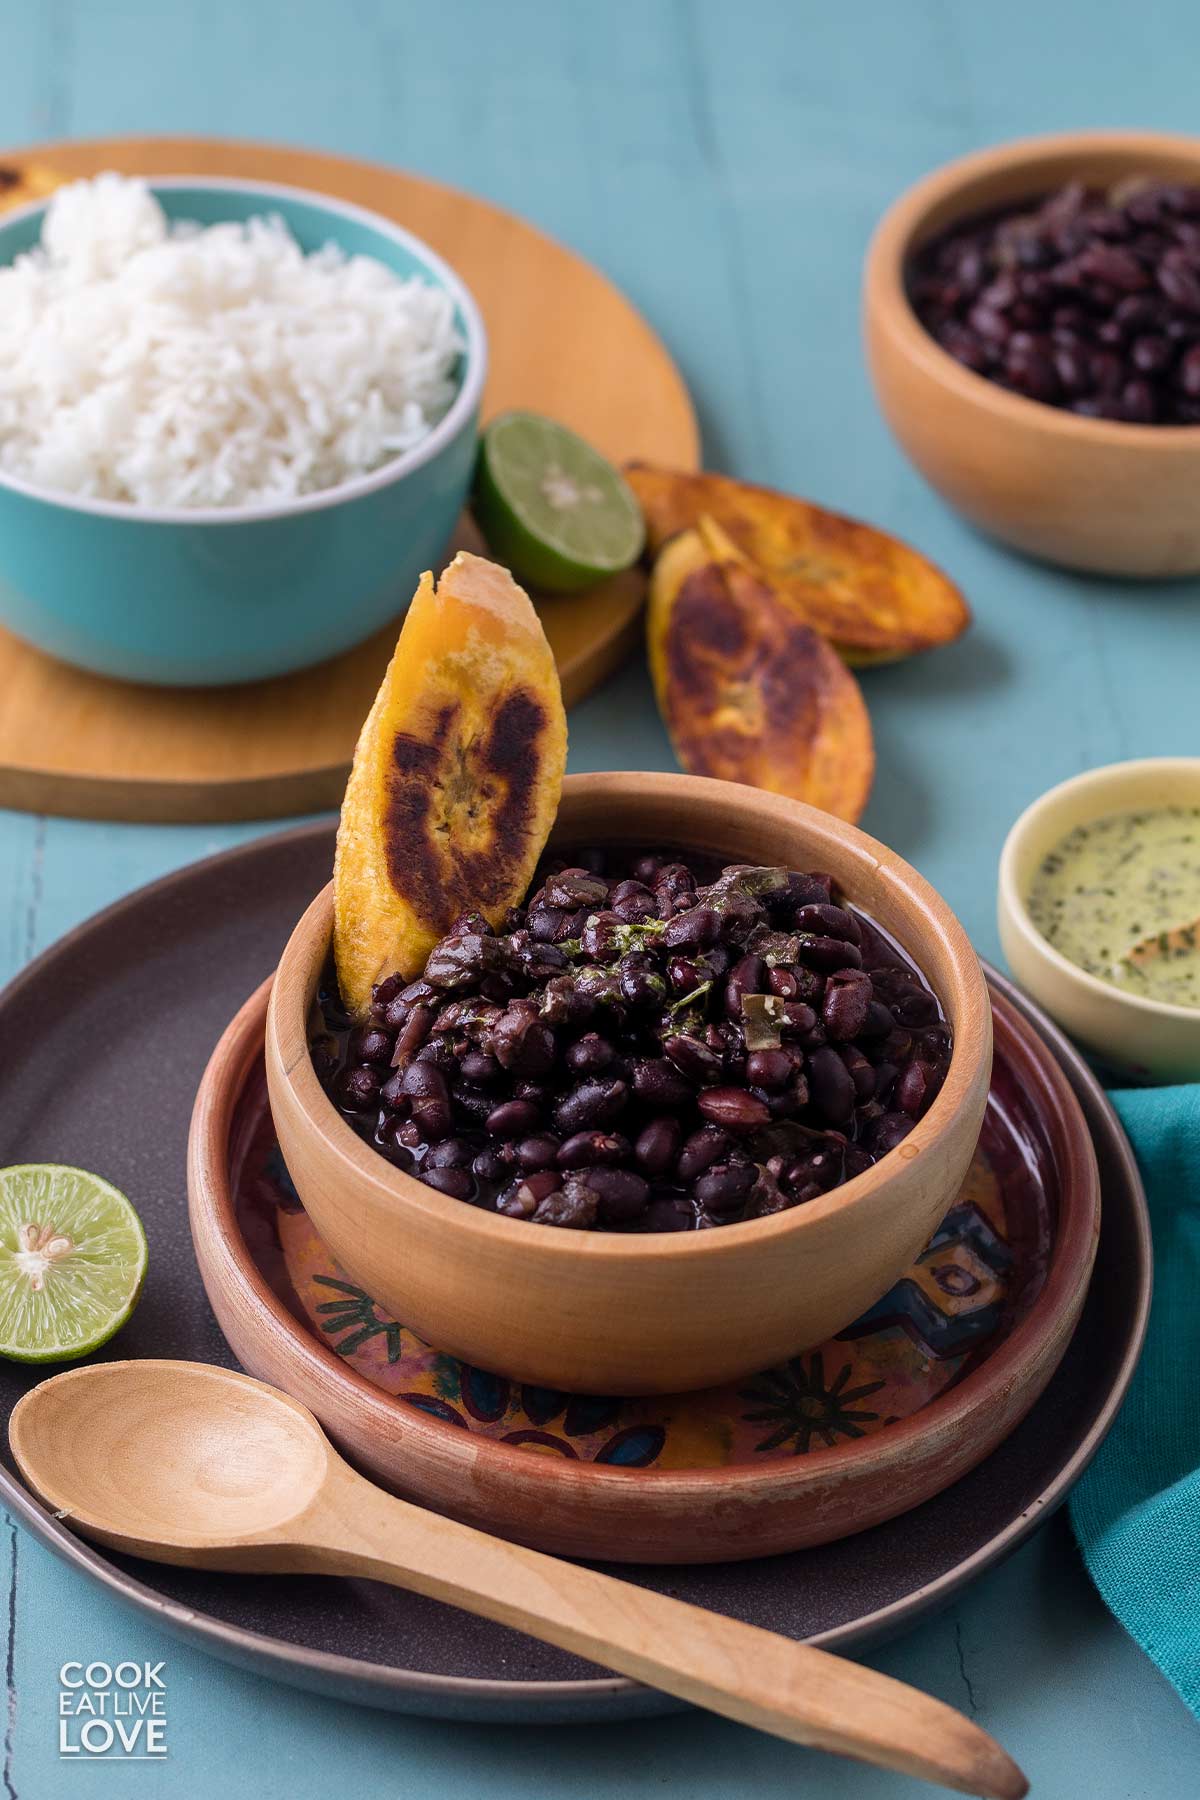 Cuban black beans served in a small wooden bowl with fried plantain garnish